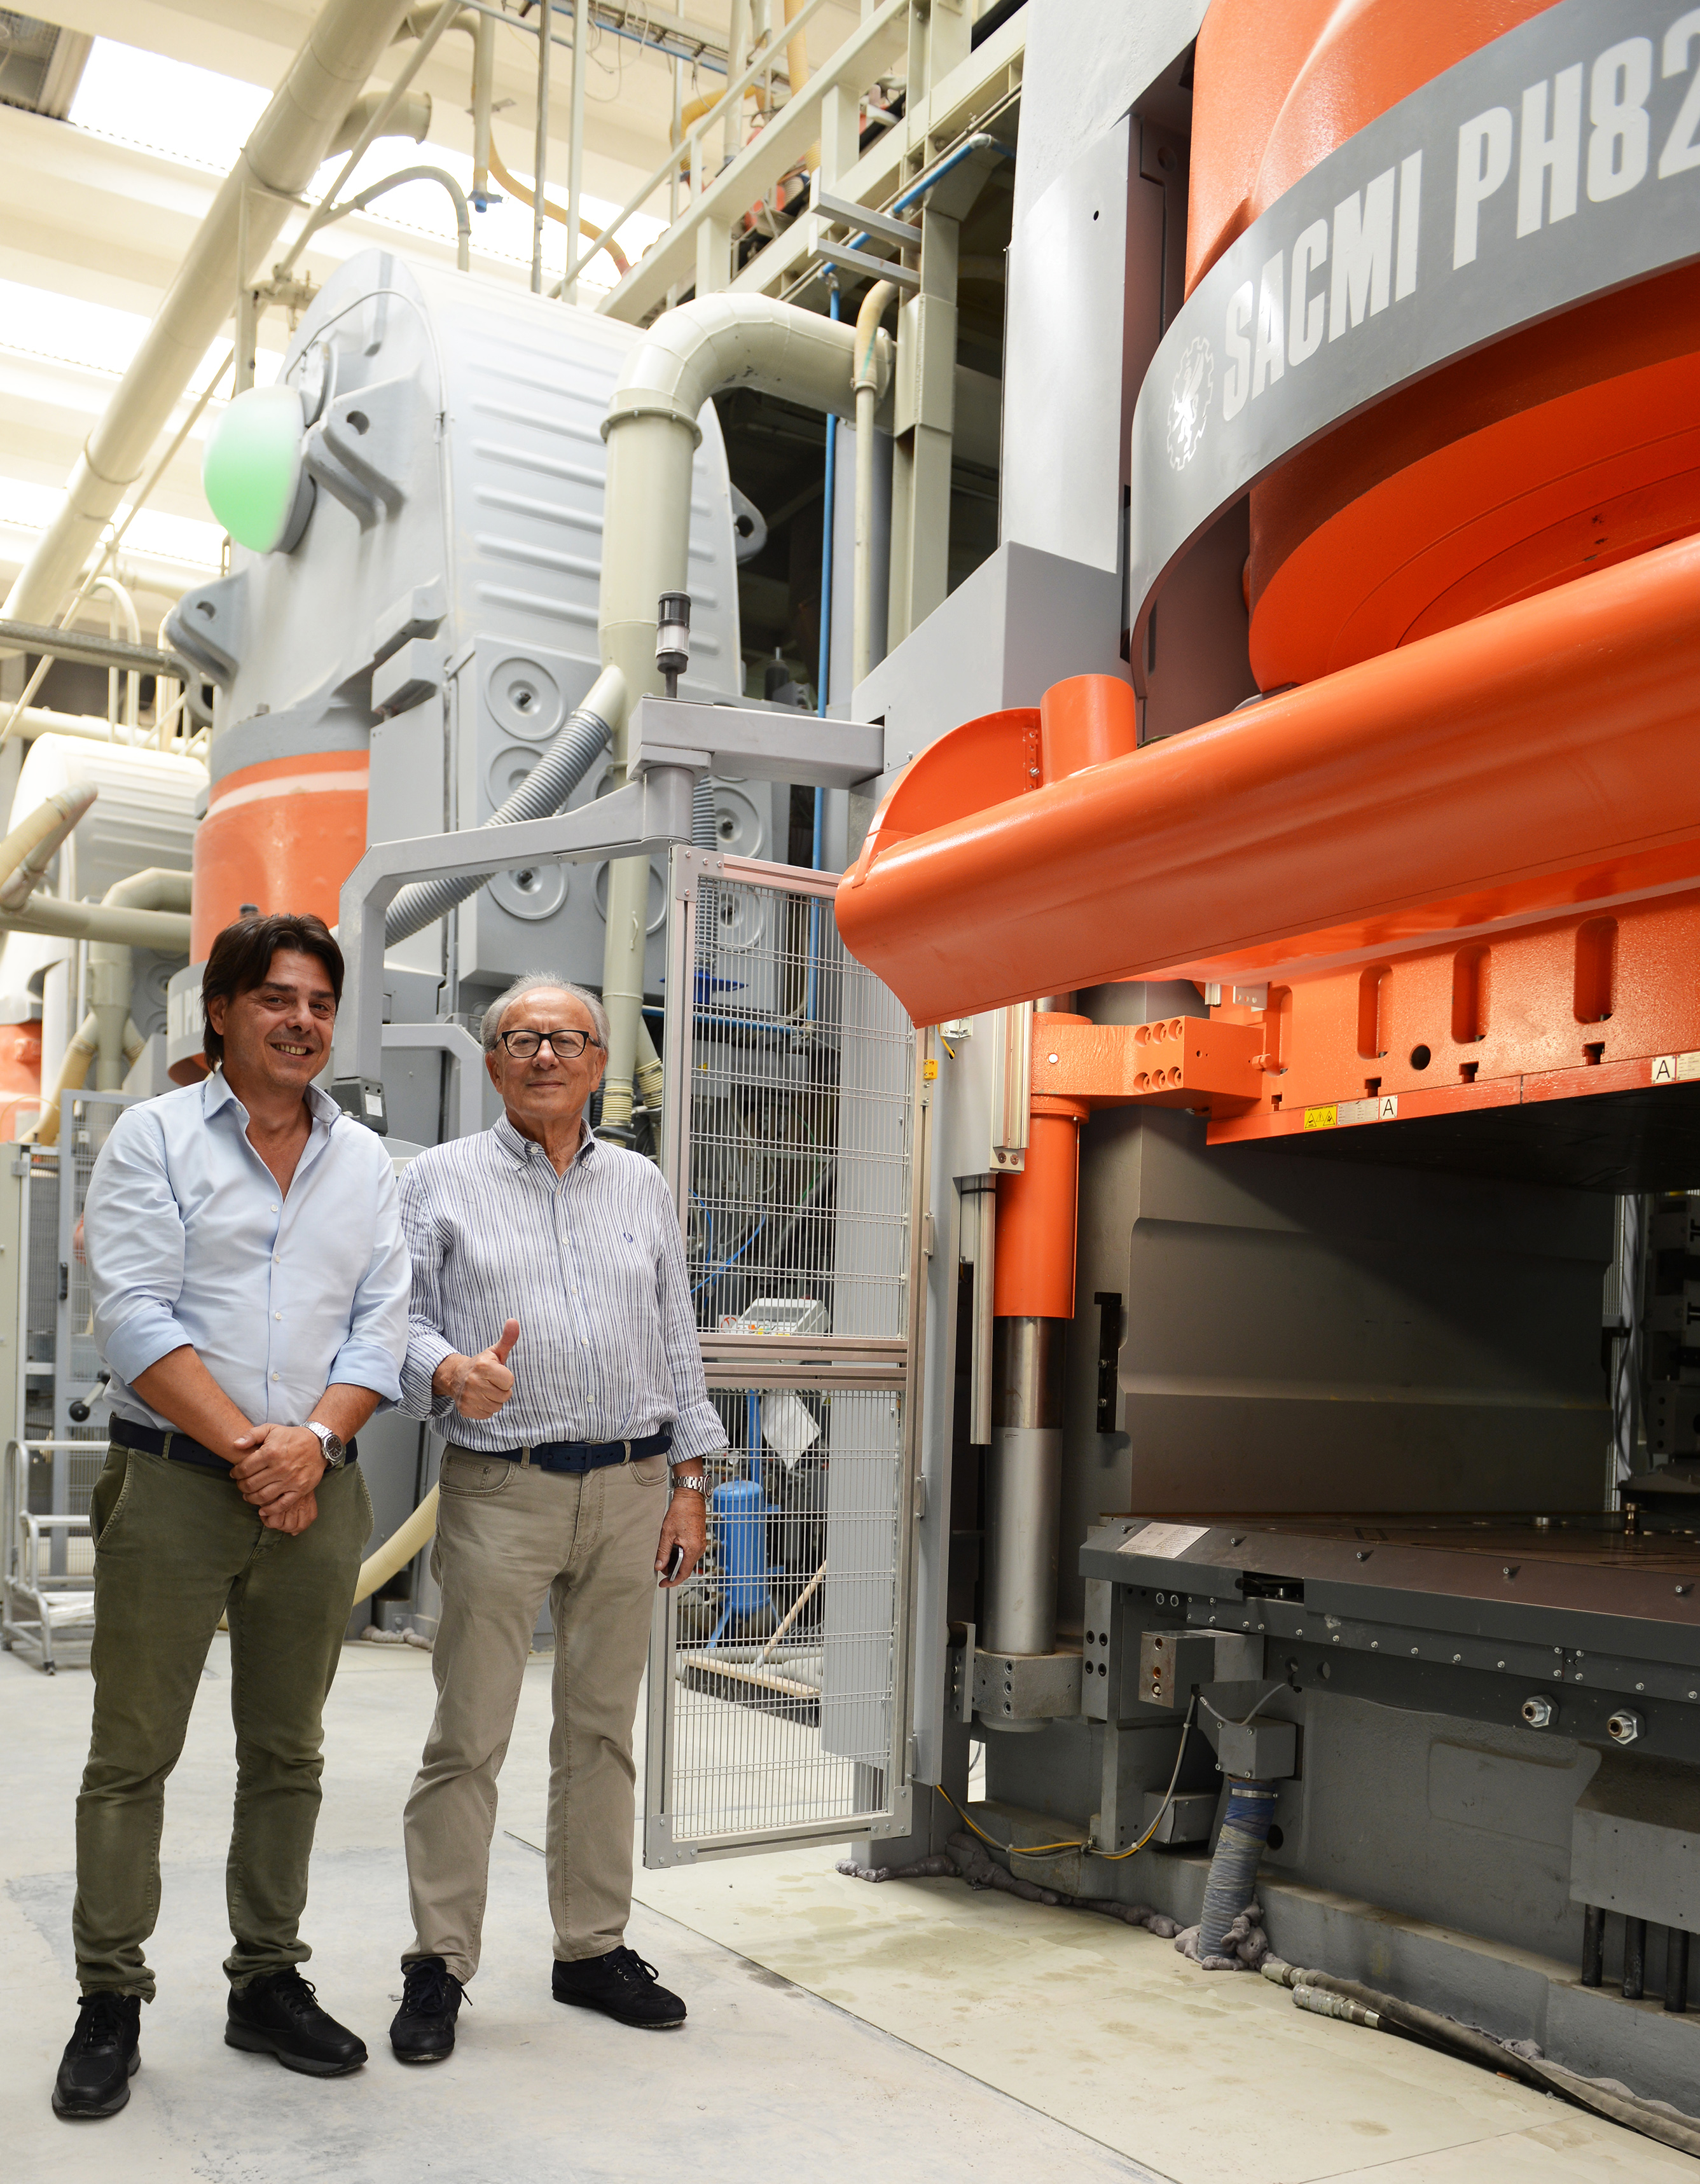 New Sacmi PH8200: the first press goes to the Romani Group